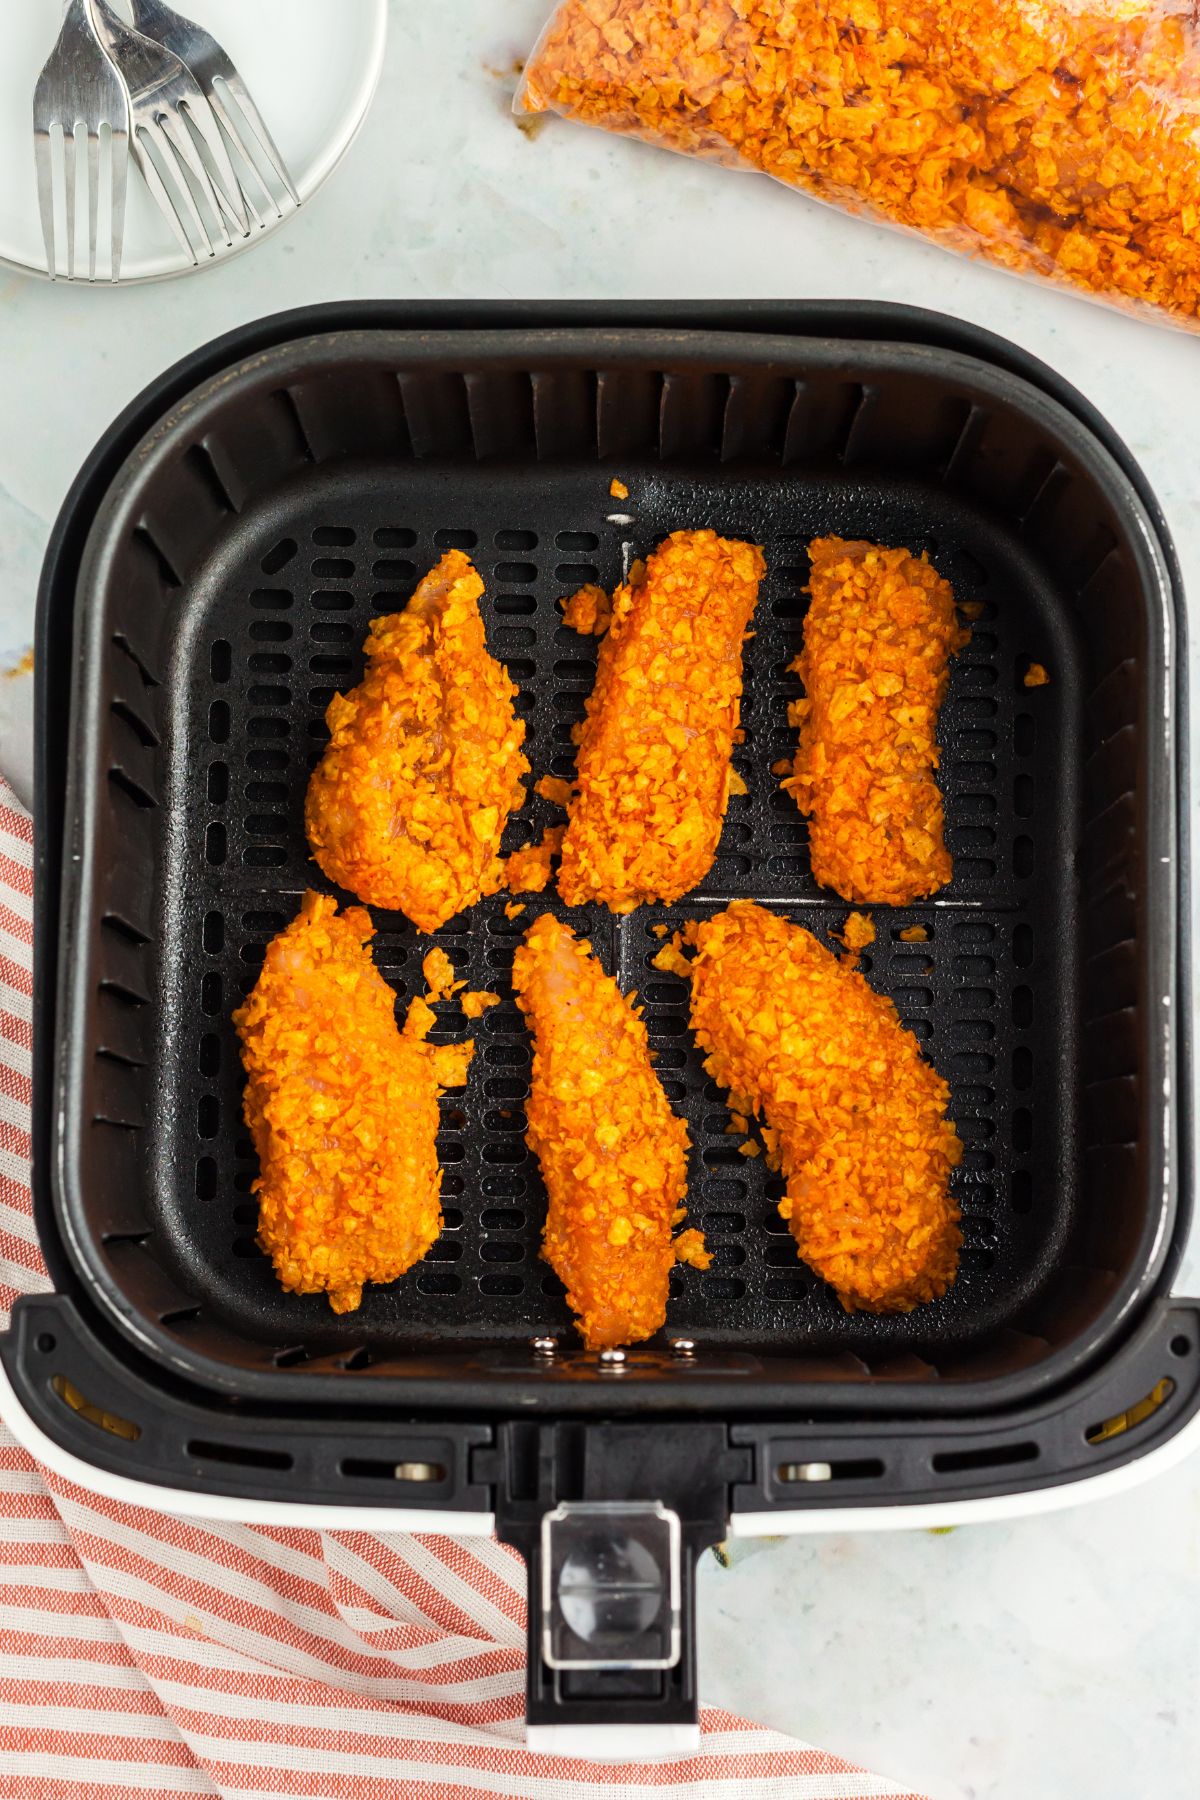 Chicken strips coated with crushed dorito chips in the air fryer basket